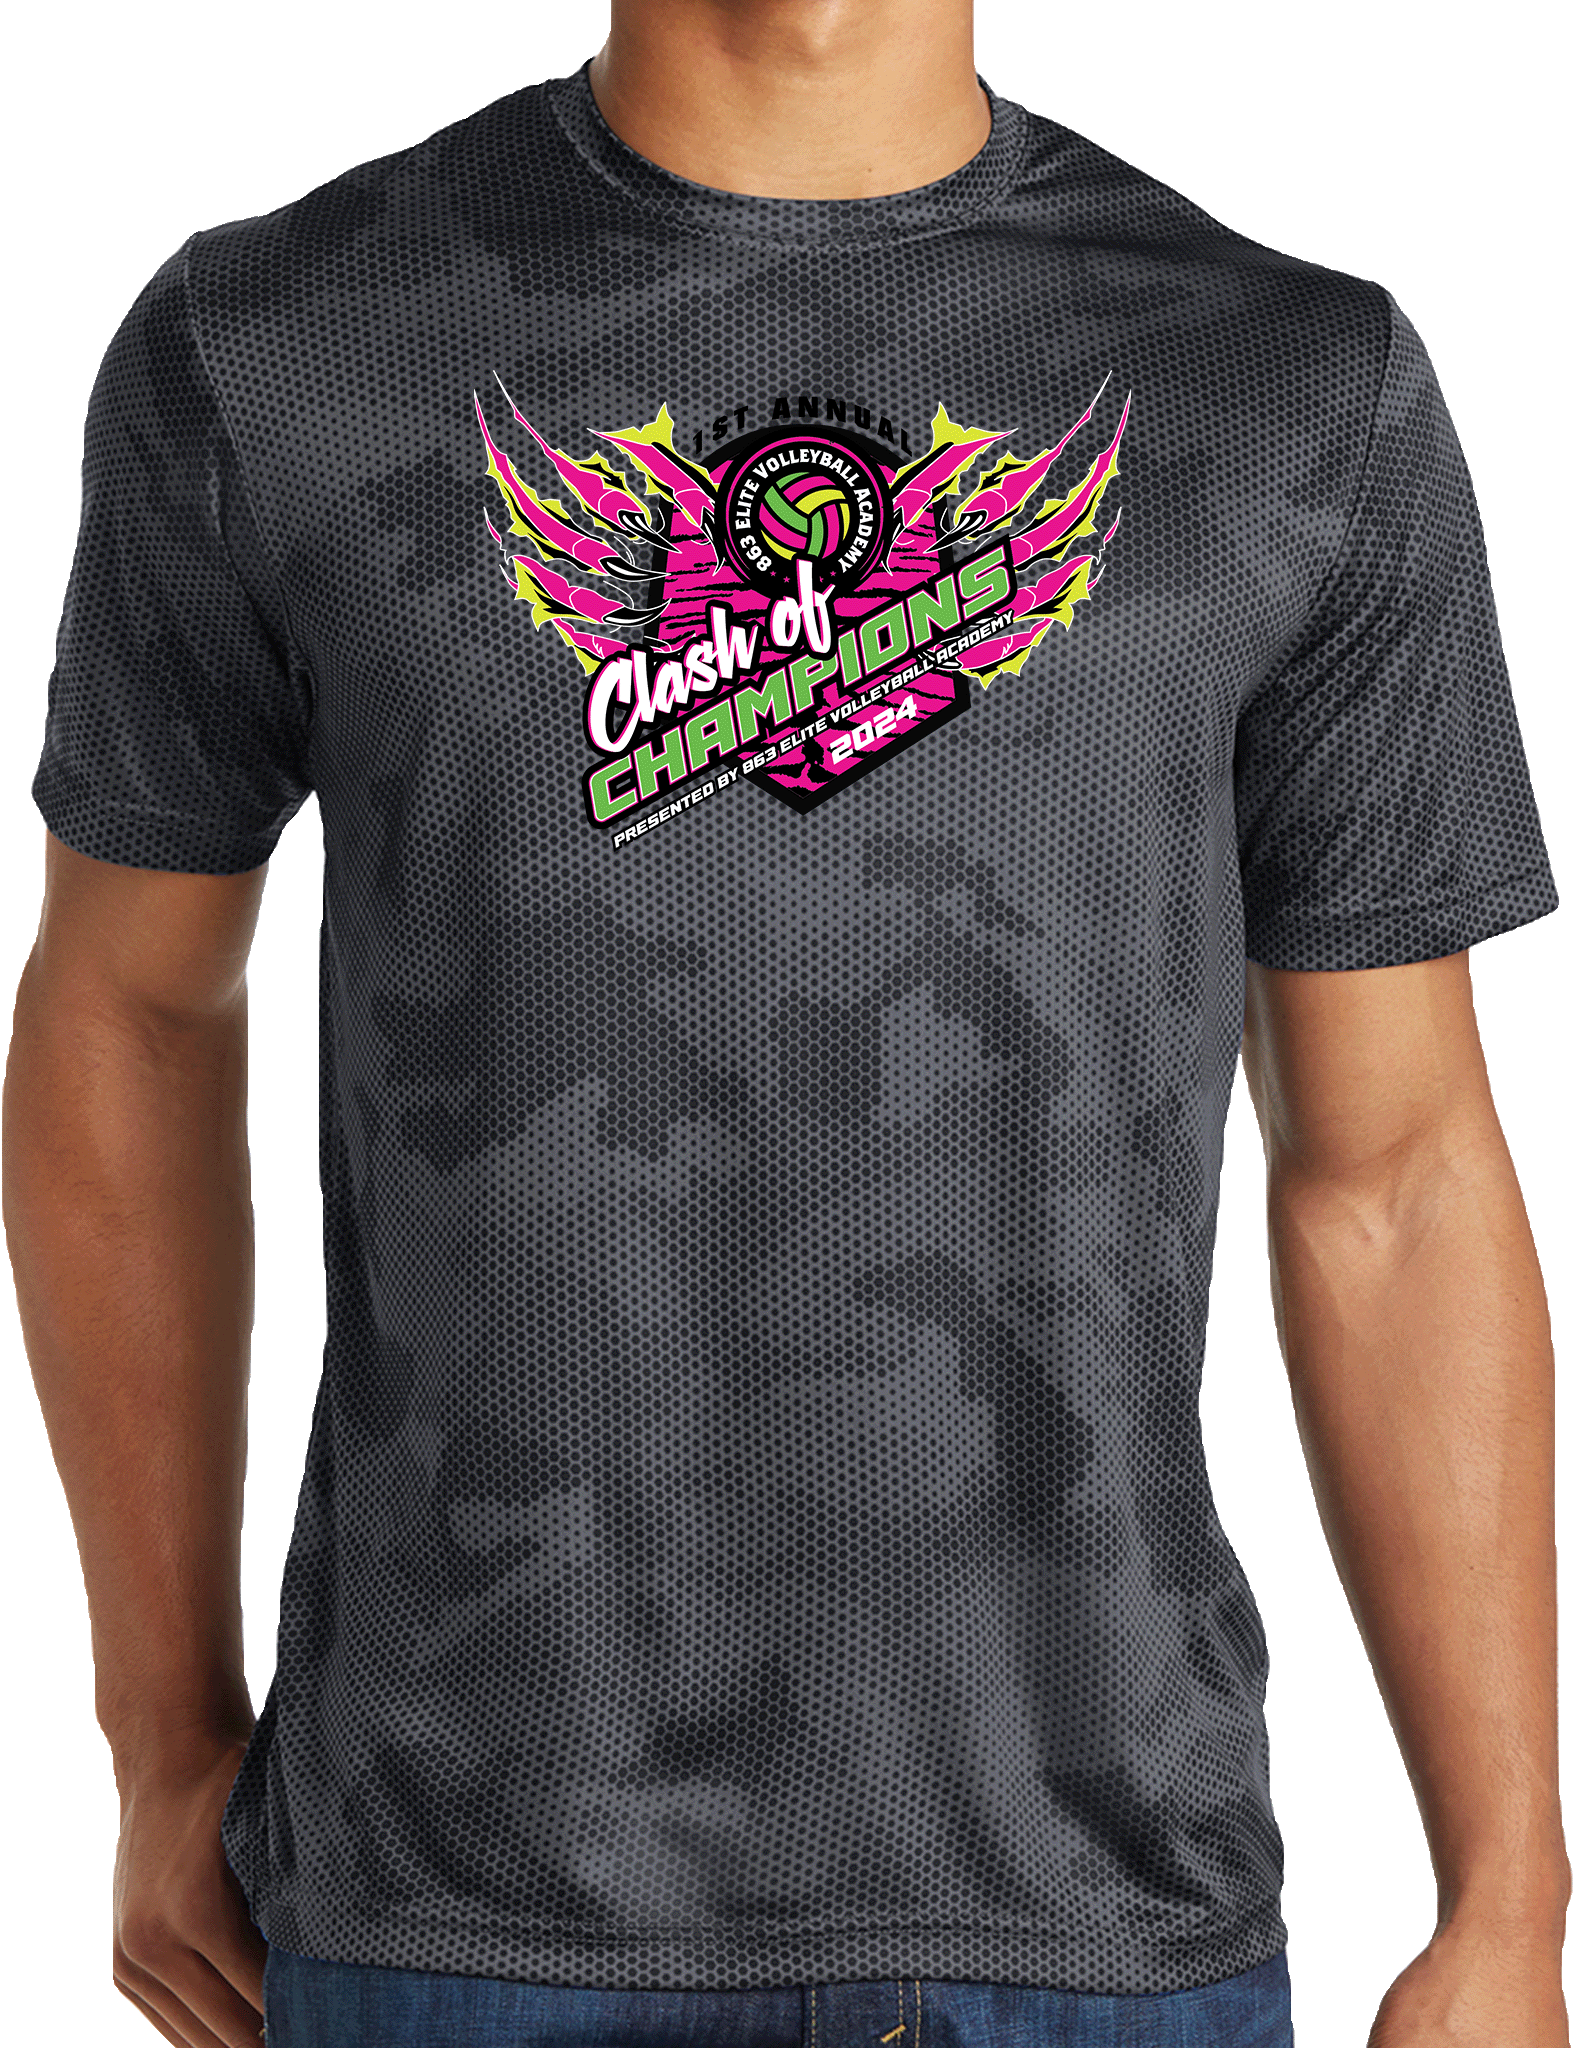 Performance Shirts - 2024 1ST ANNUAL CLASH OF CHAMPIONS